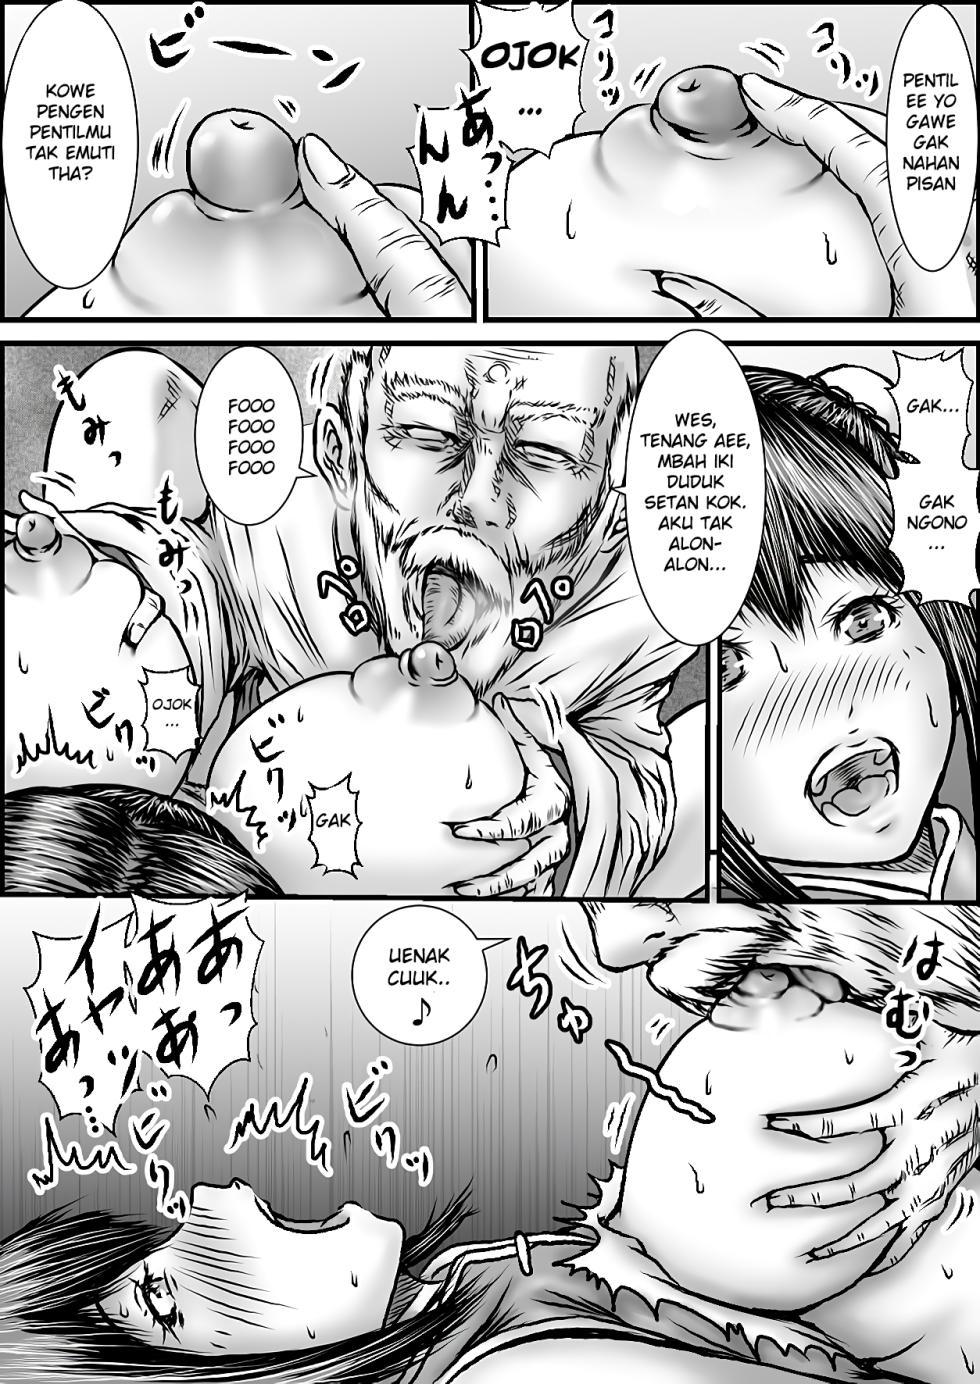 [Rabikuze] The result of trying to avenge my parents' death... [Jowo Suroboyoan] [Gagak_Ireng] - Page 7